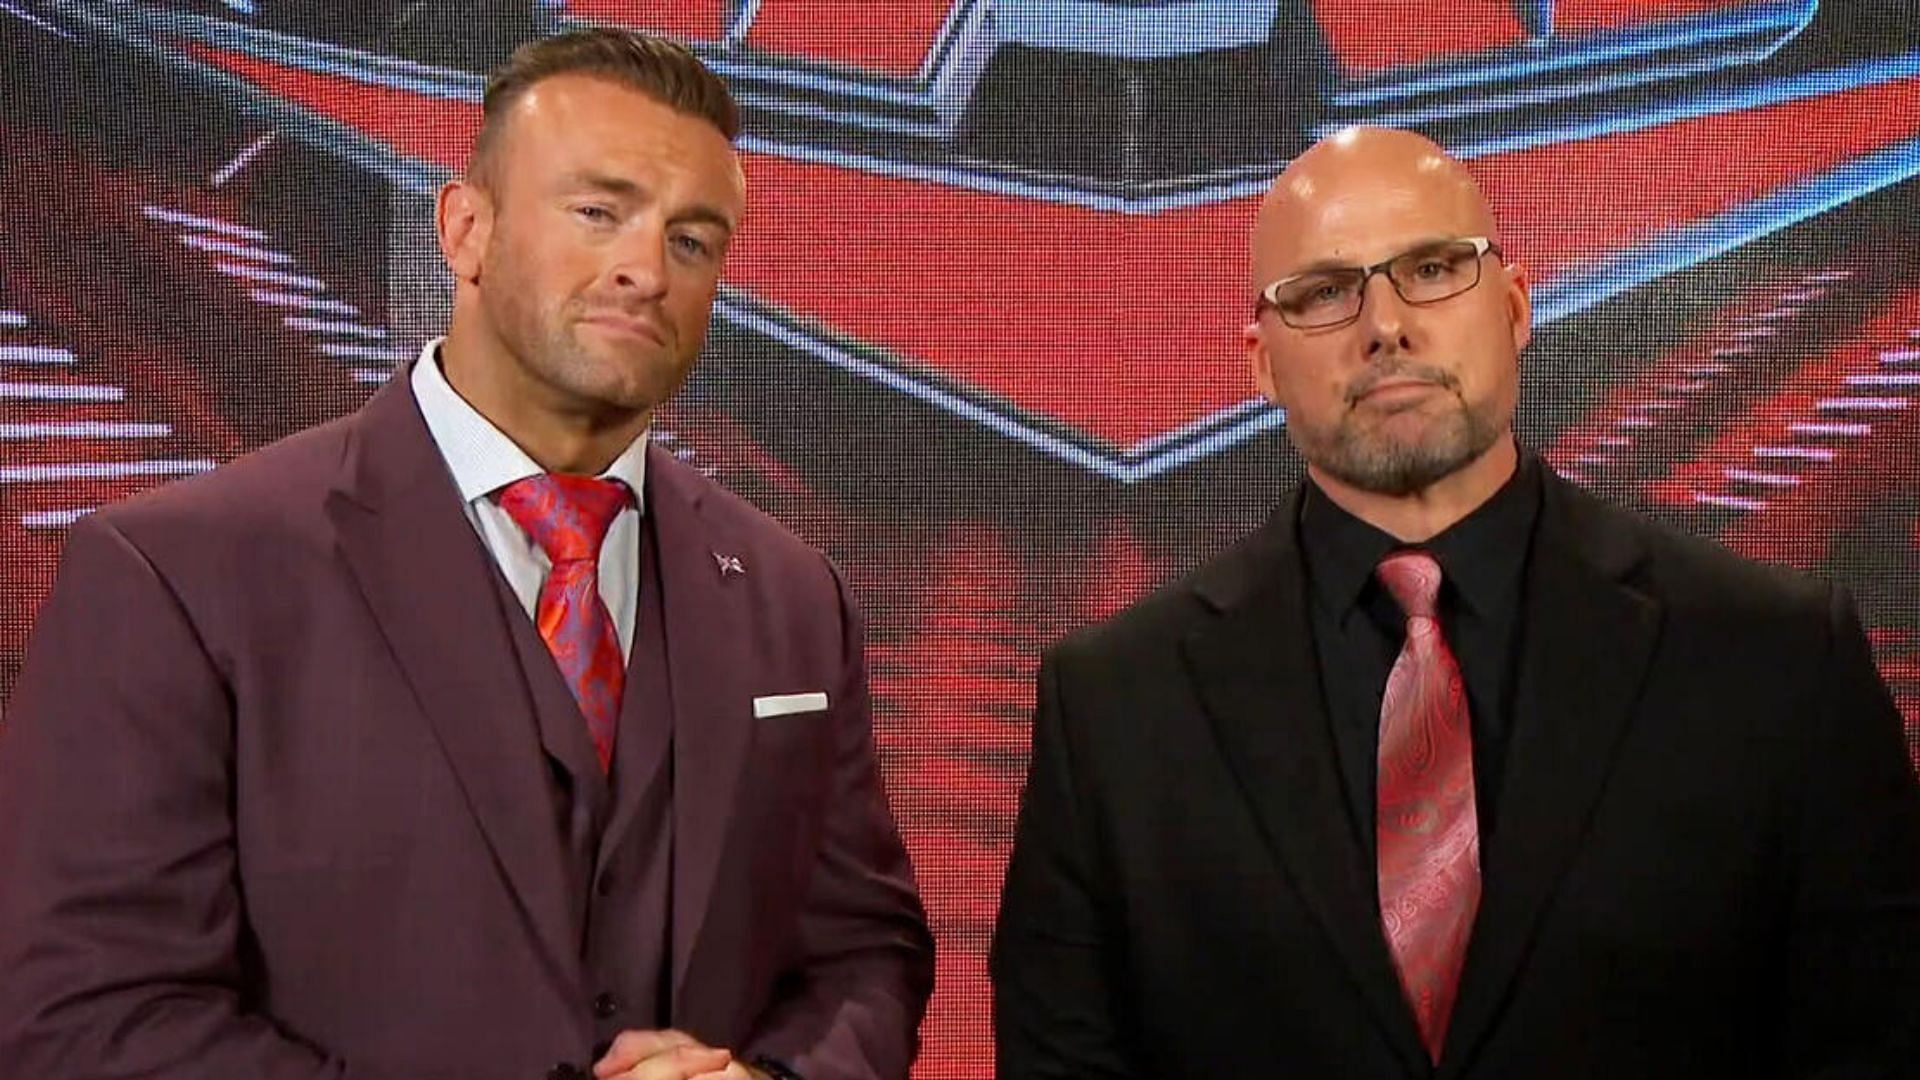 Nick Aldis (left) is the SmackDown GM, Pearce (right) is the RAW GM.